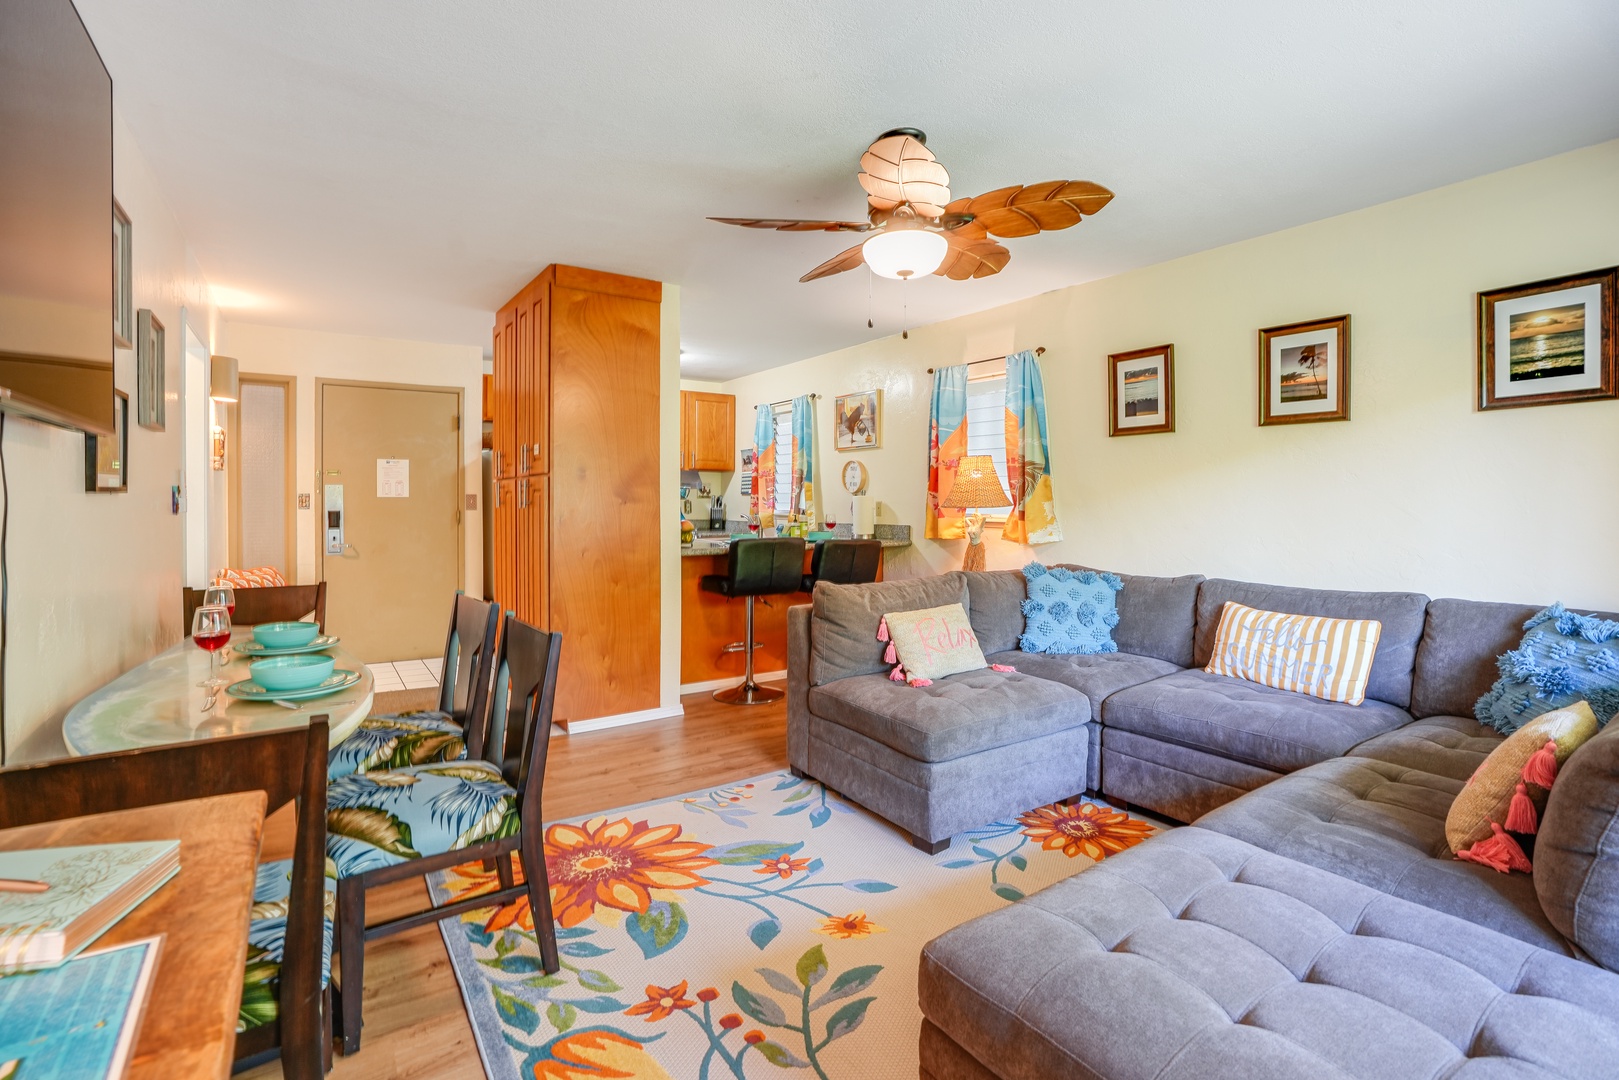 Kapaa Vacation Rentals, Nani Hale - Kitchen with bar is open to the living area